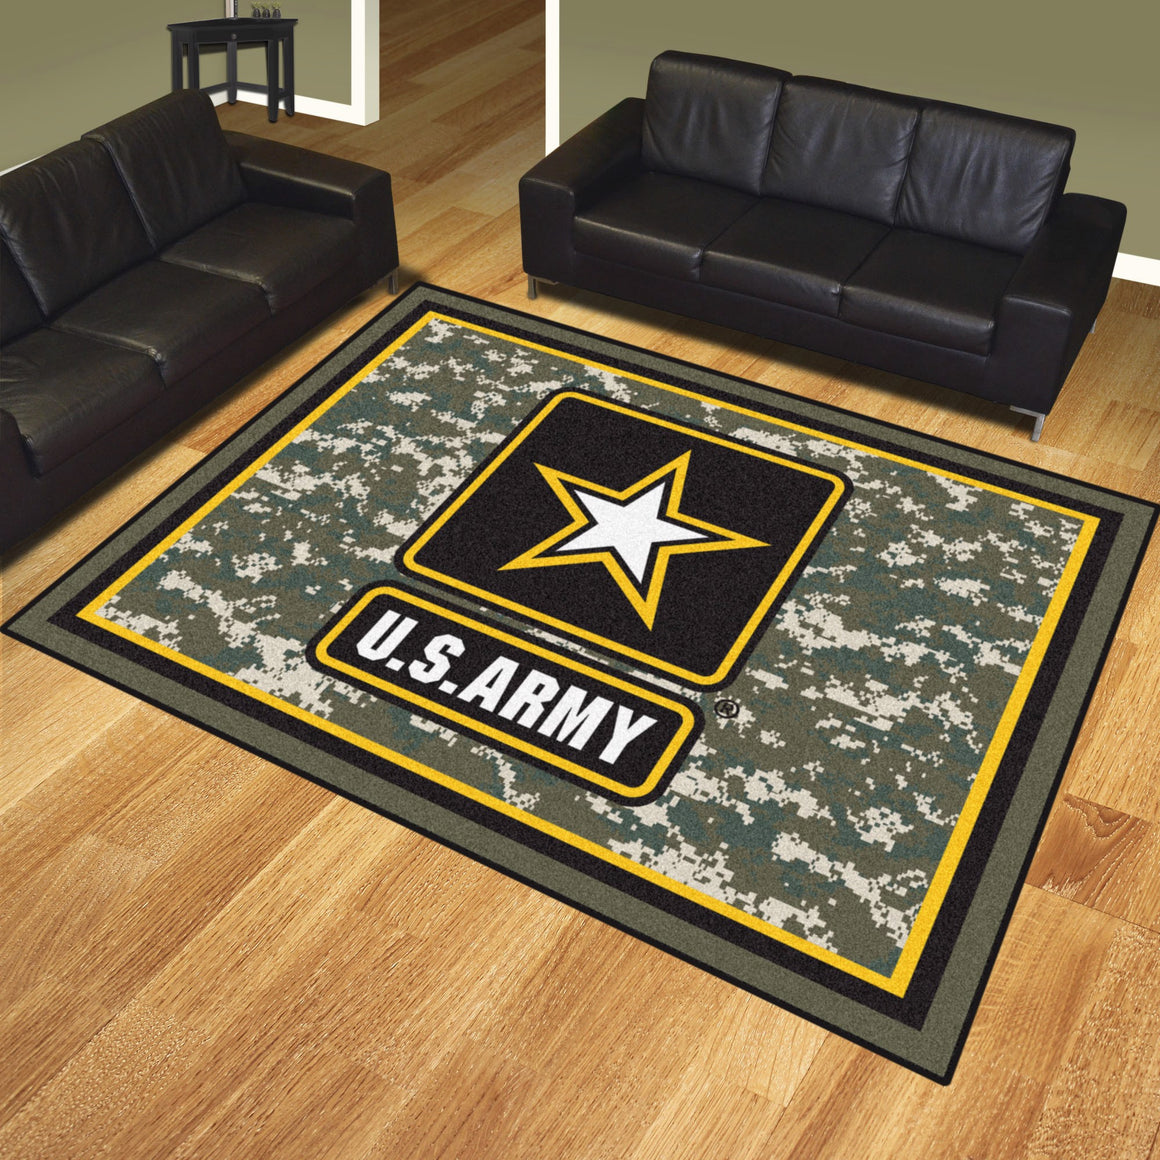 Rug 8x10 US Army - Man Cave Boutique